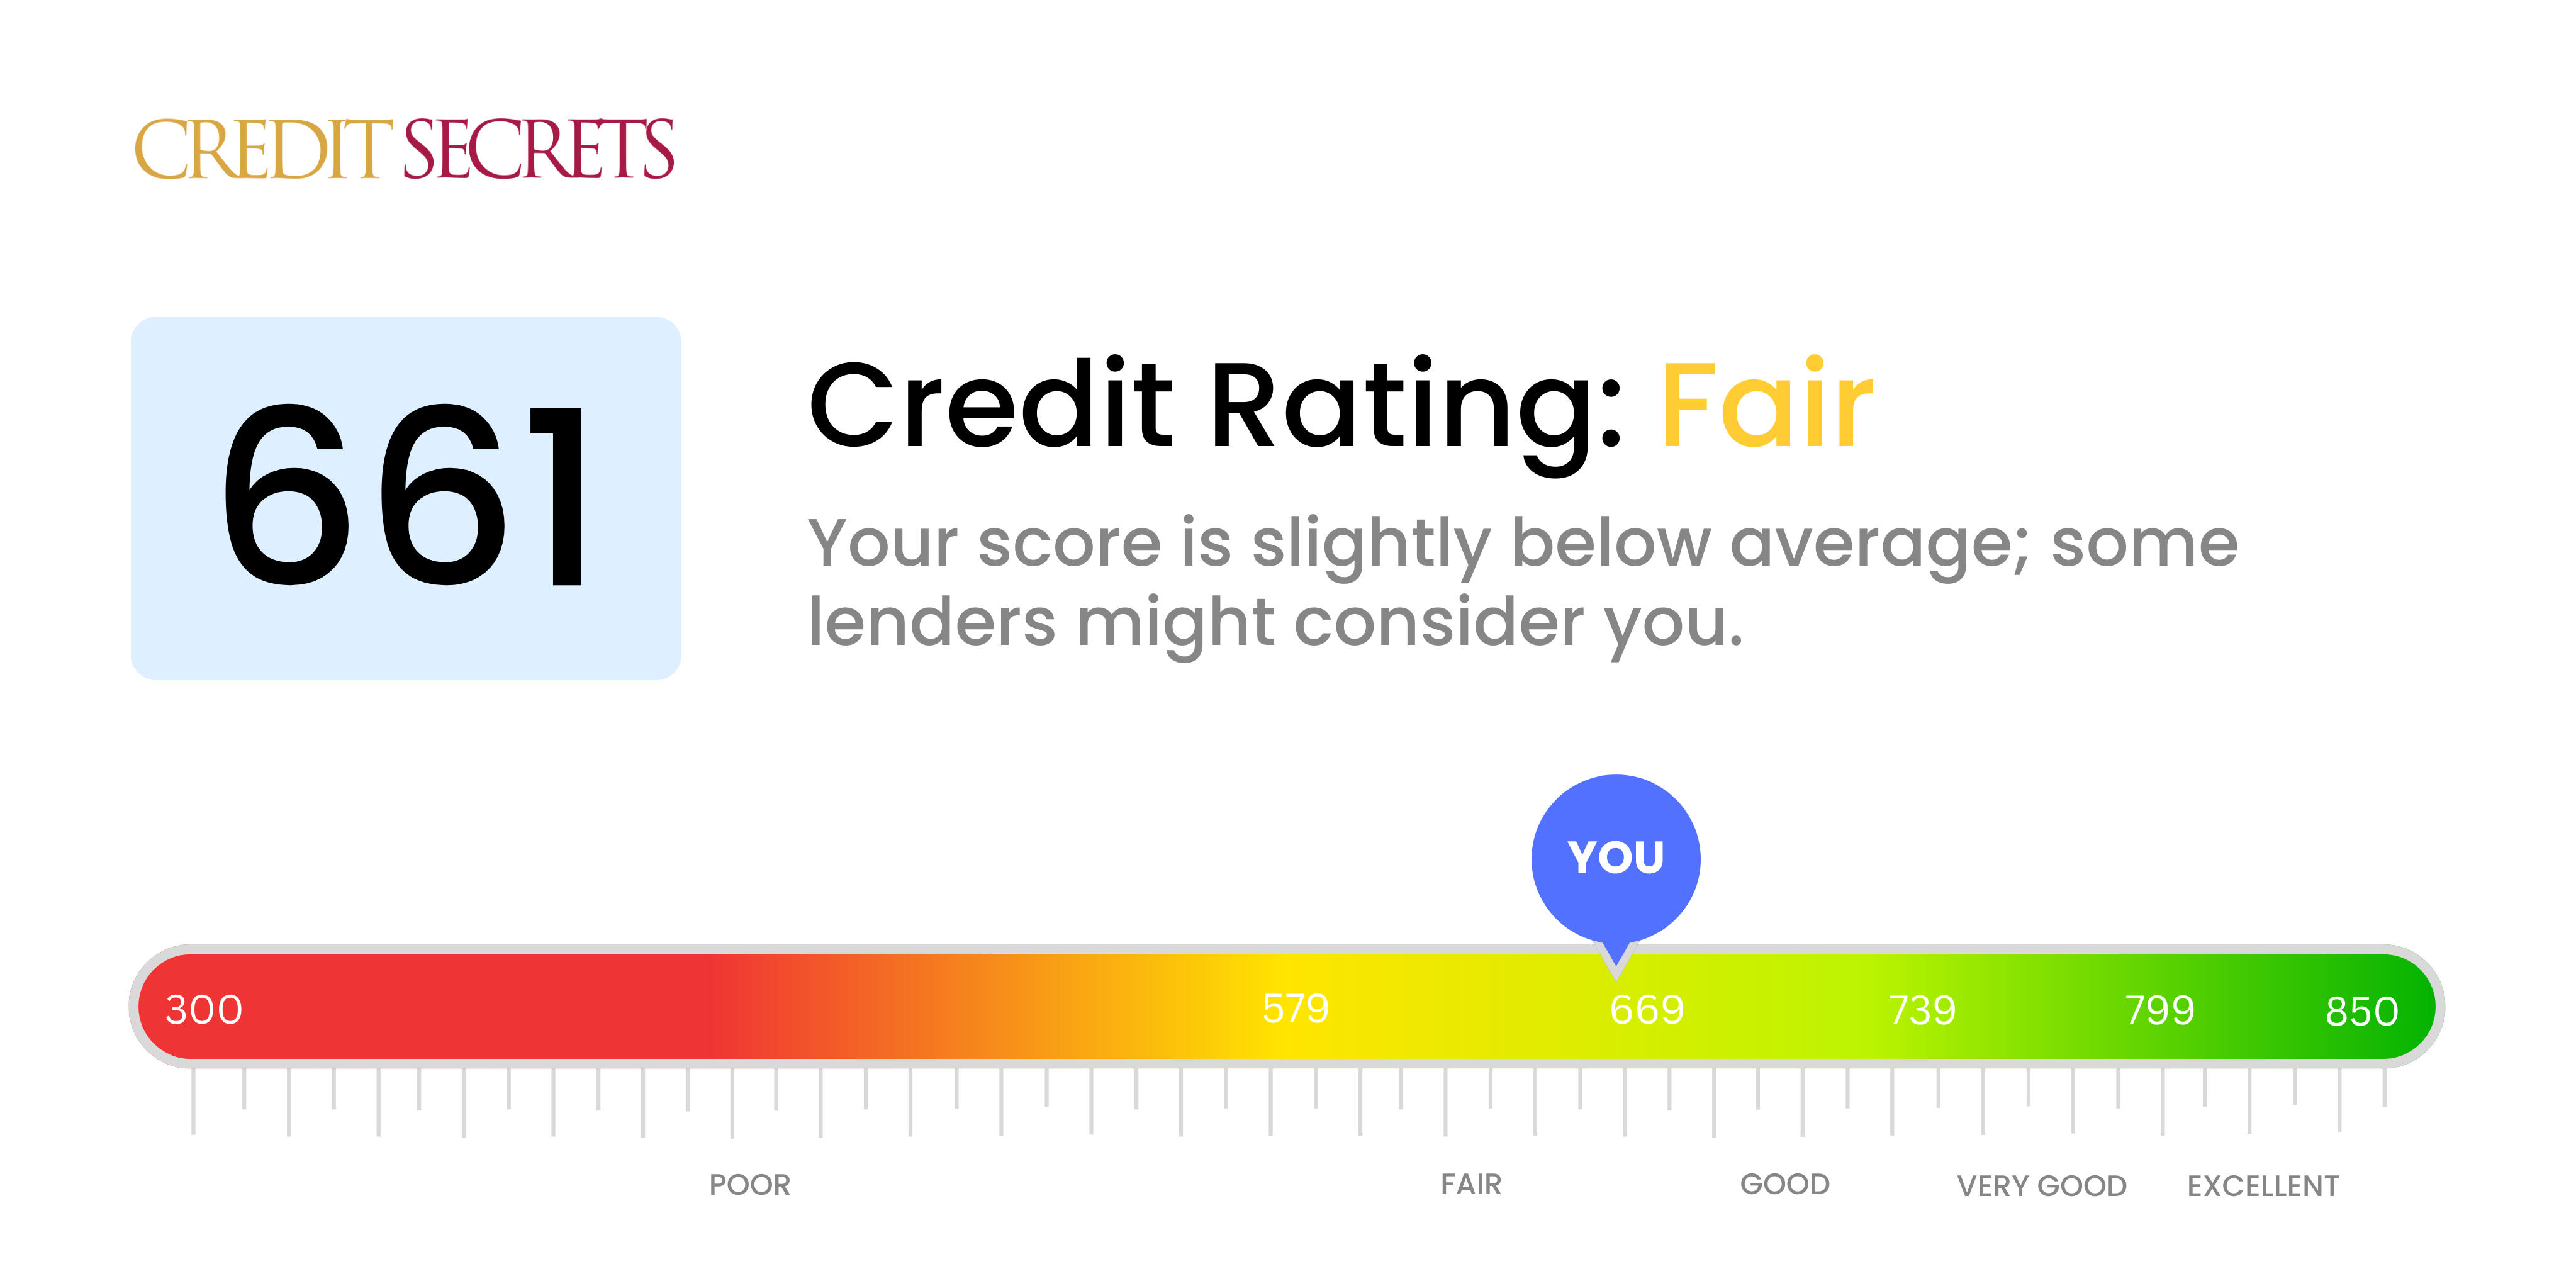 Is 661 a good credit score?